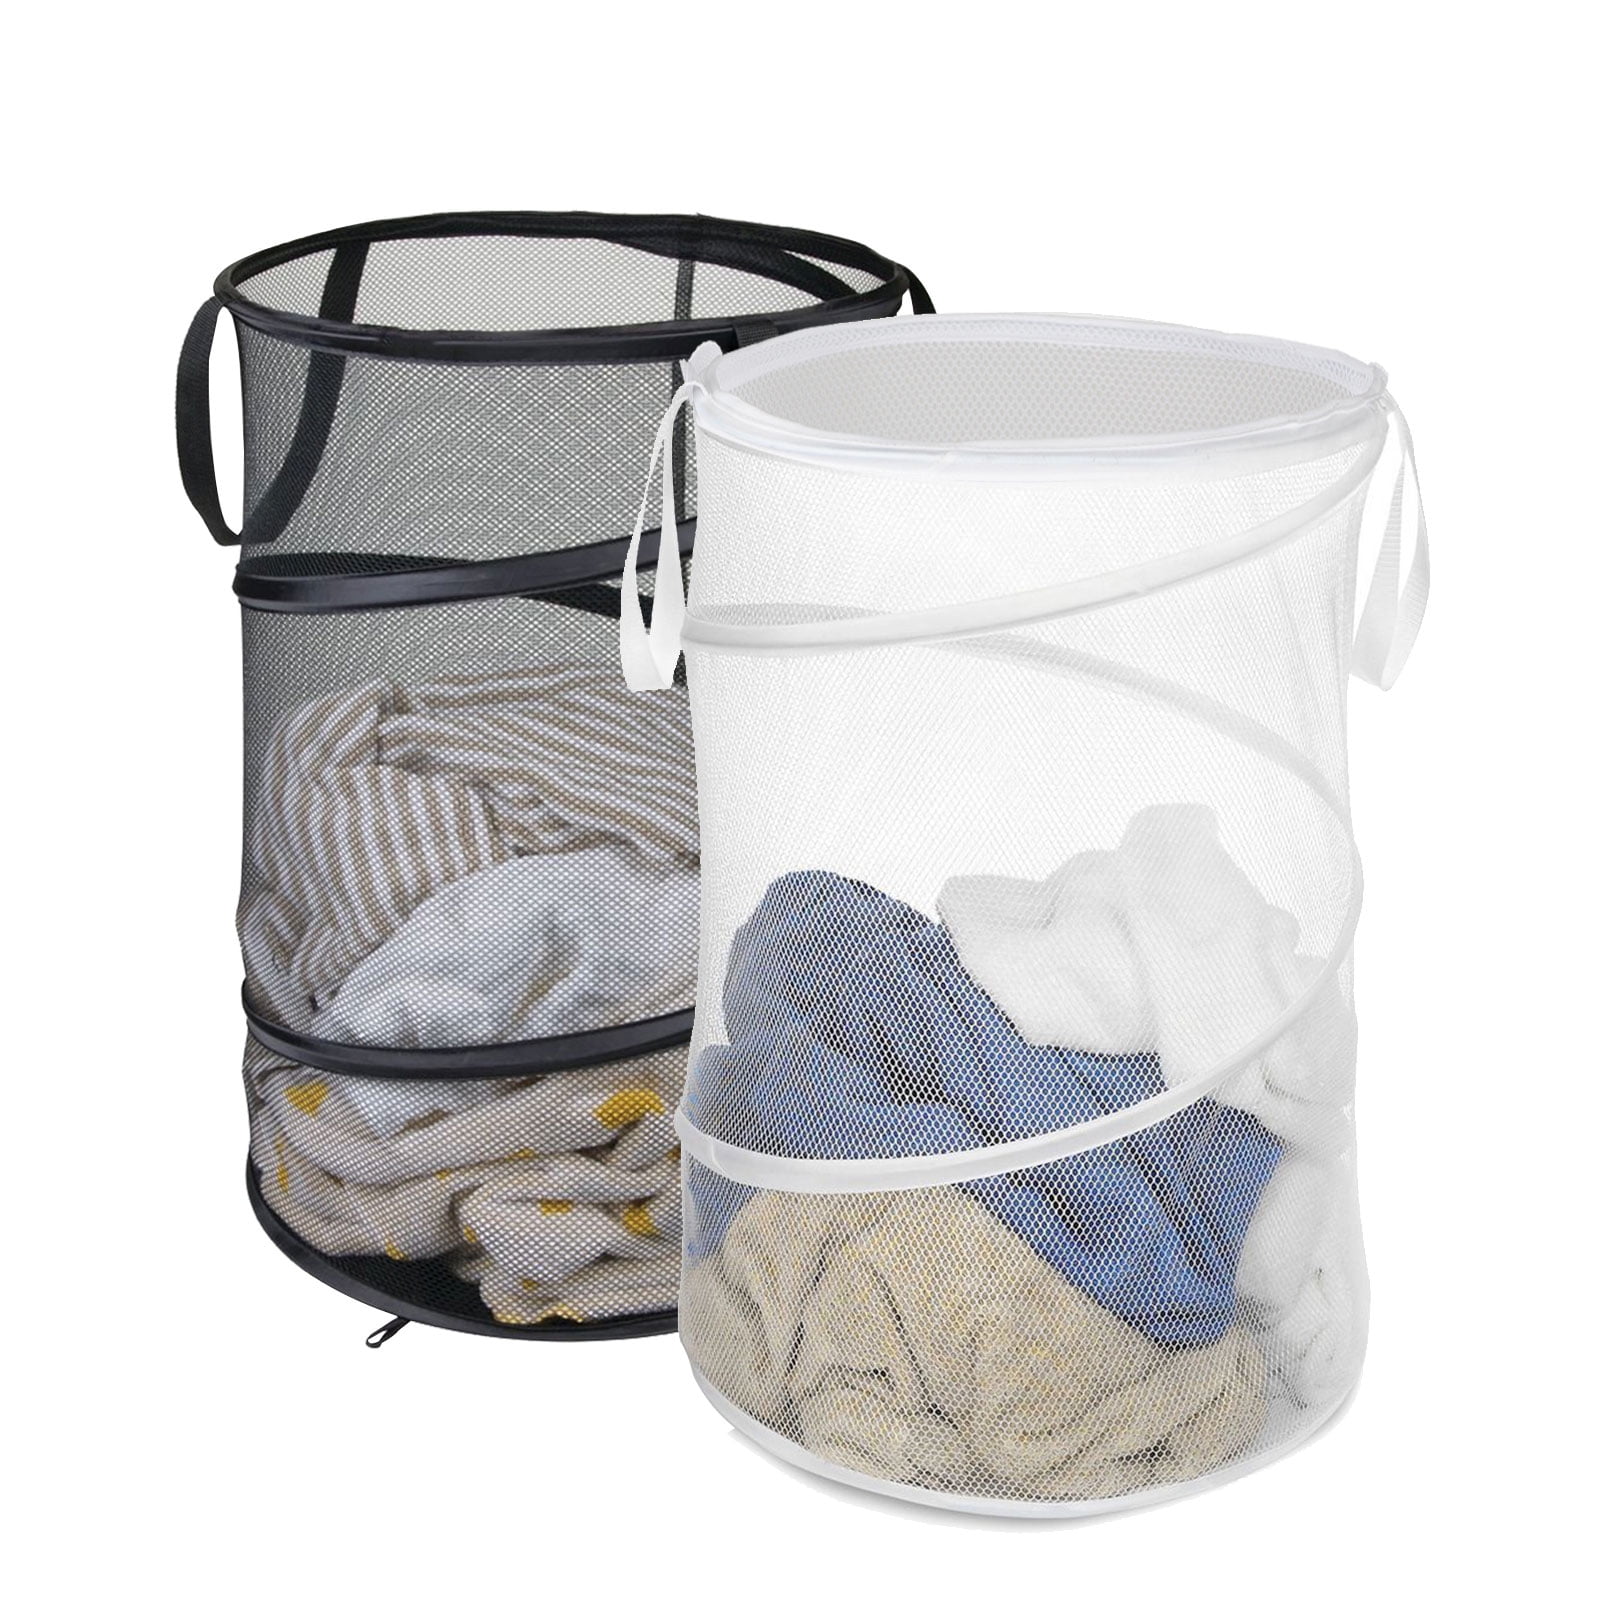 College Dorm or Travel. 18x11.5x11.5 Collapsible Mesh Hamper Clothes Laundry Basket Storage Bag with Reinforced Carry Handles for The Kids Room GEZICHTA Mesh Pop-up Laundry Hamper